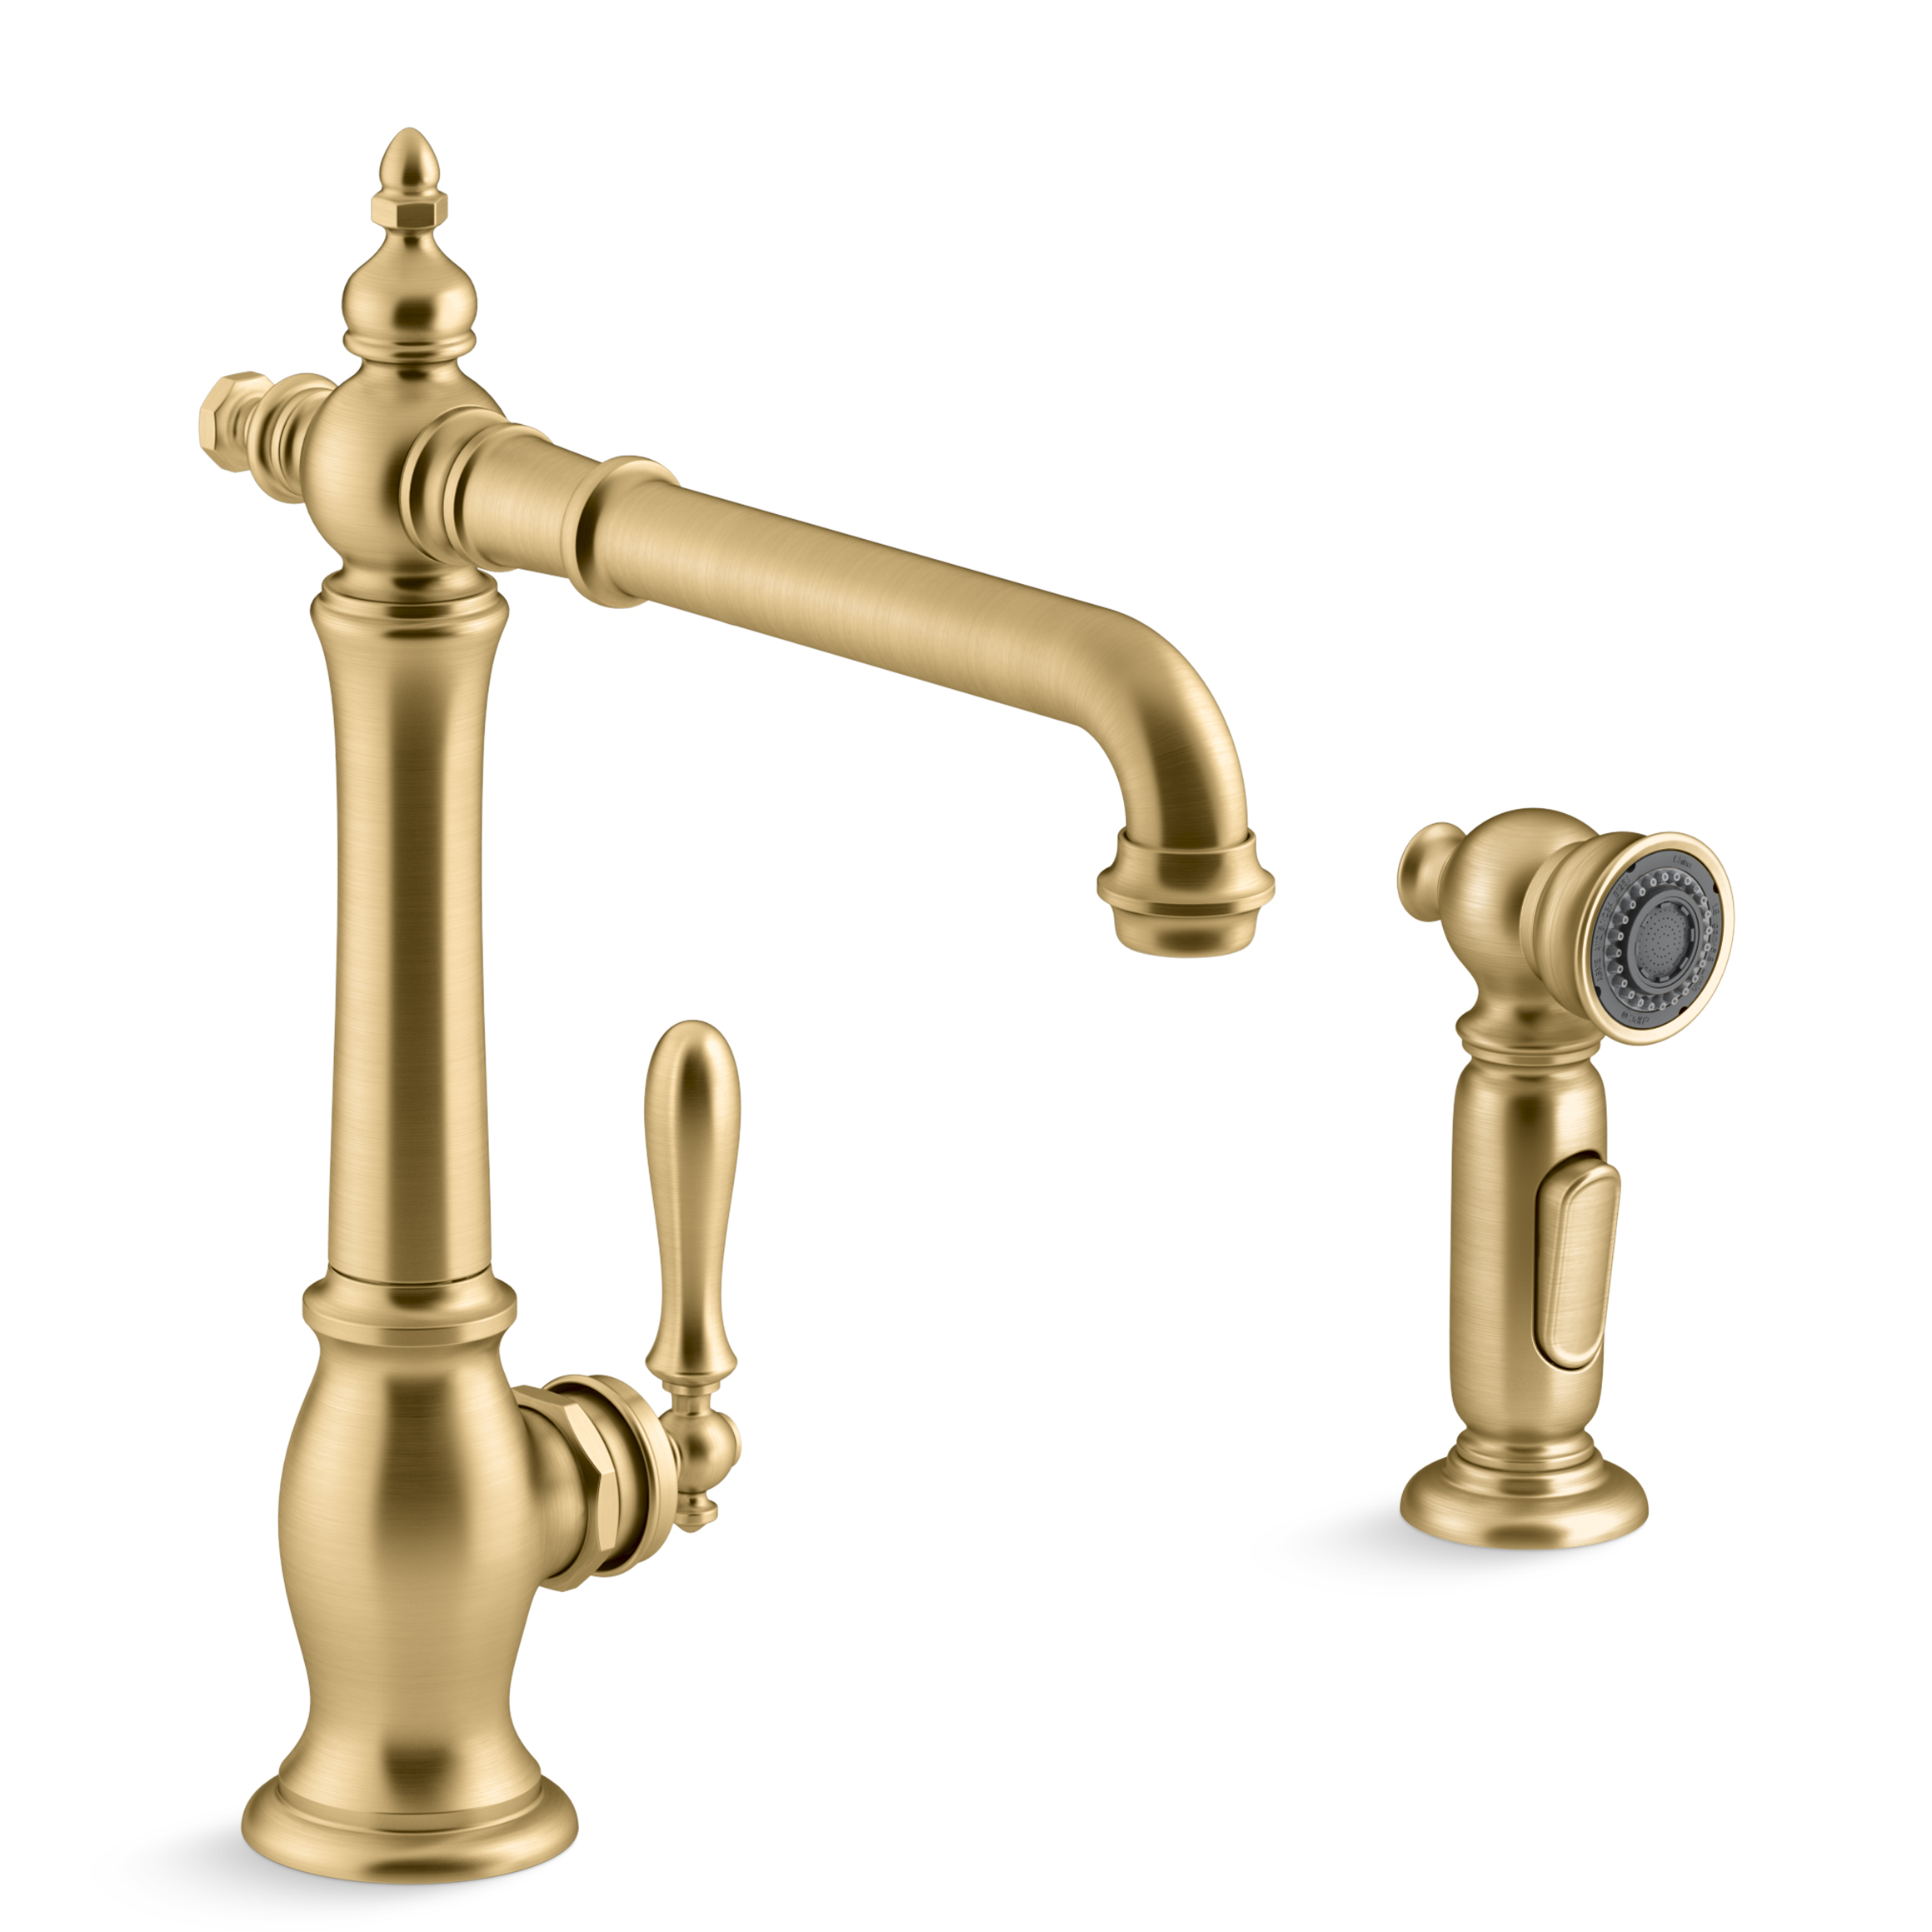 Kohler® 99265-2MB Artifacts® 2-Hole Kitchen Faucet with Swing Spout, Victorian Spout Design, Brushed Brass